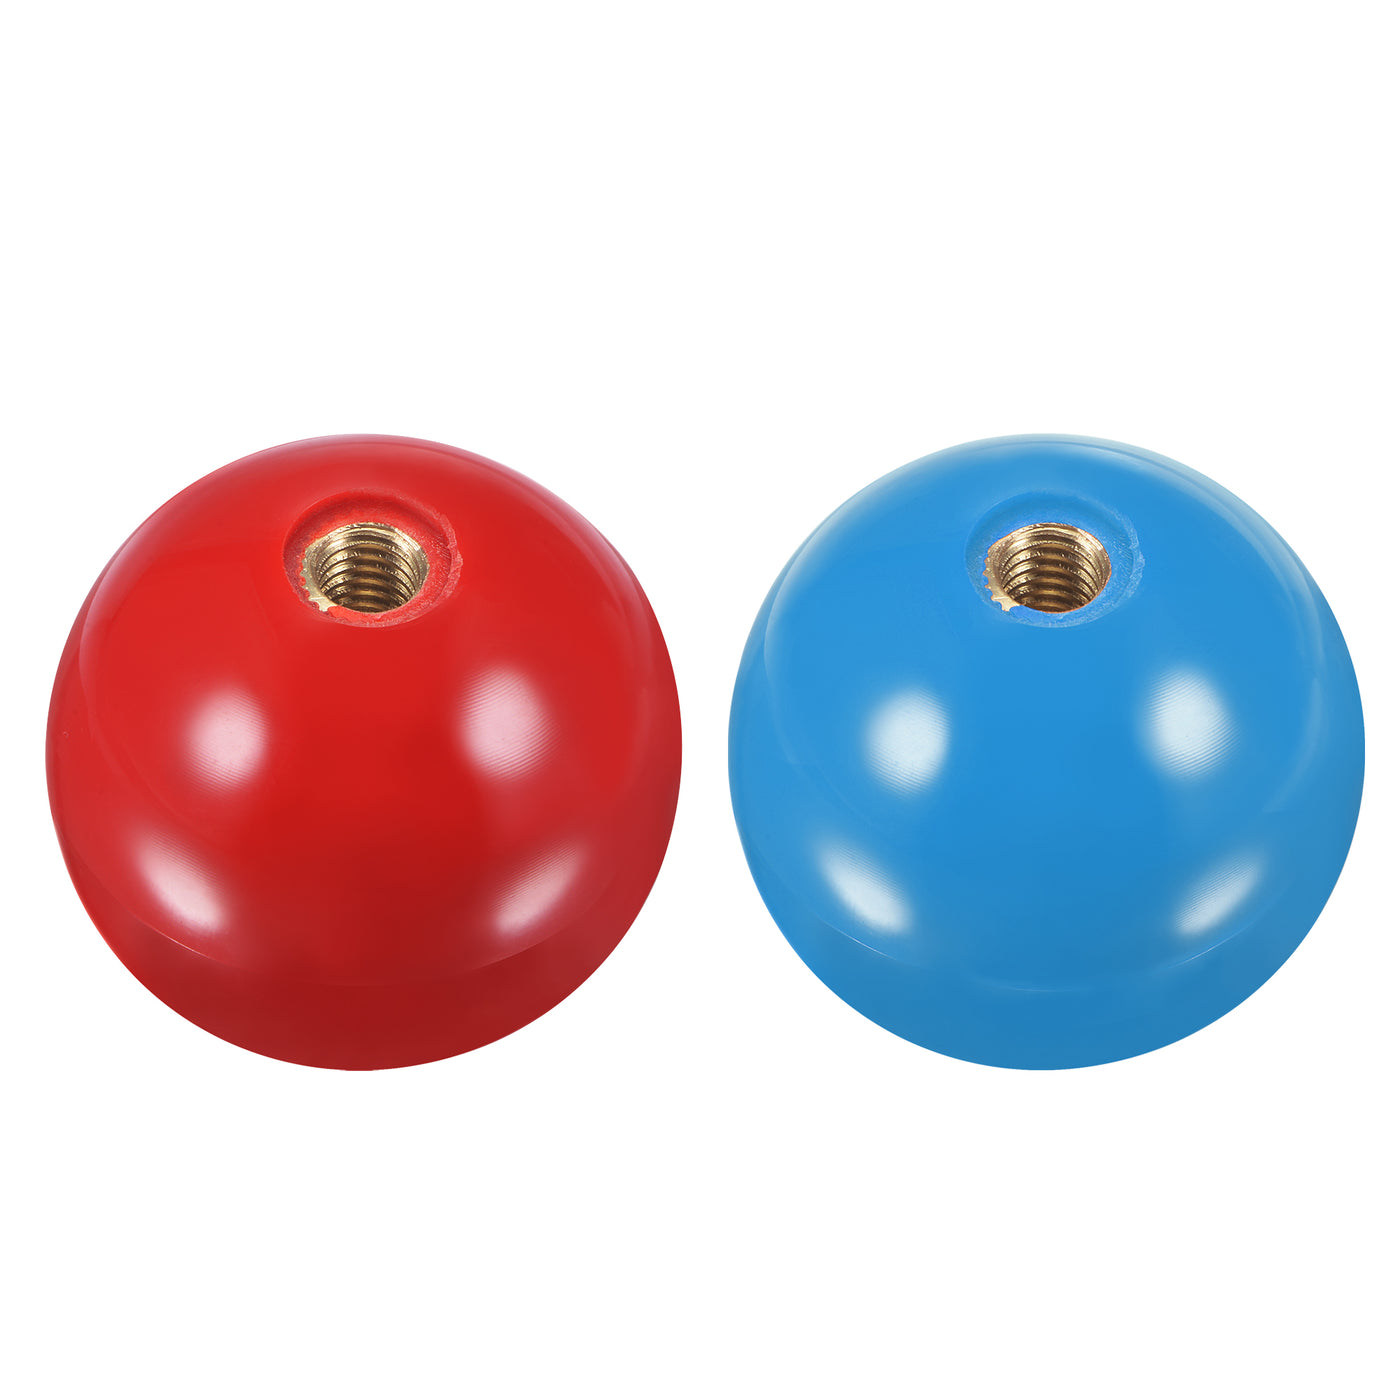 uxcell Uxcell Joystick Head Rocker Ball Top Handle Arcade Game Replacement Red/Blue